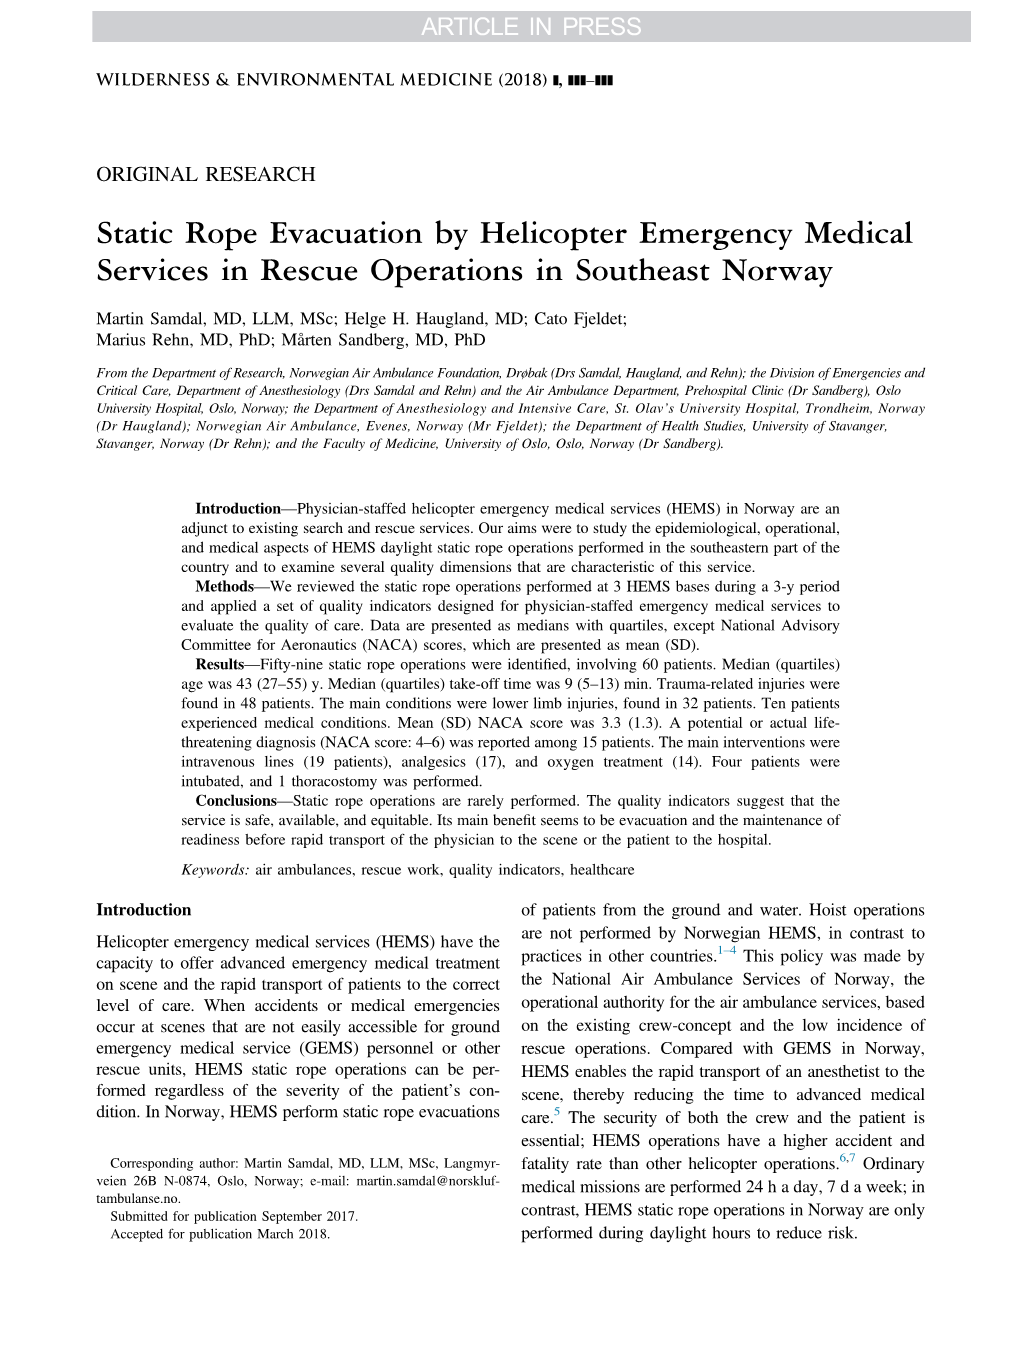 Static Rope Evacuation by Helicopter Emergency Medical Services in Rescue Operations in Southeast Norway